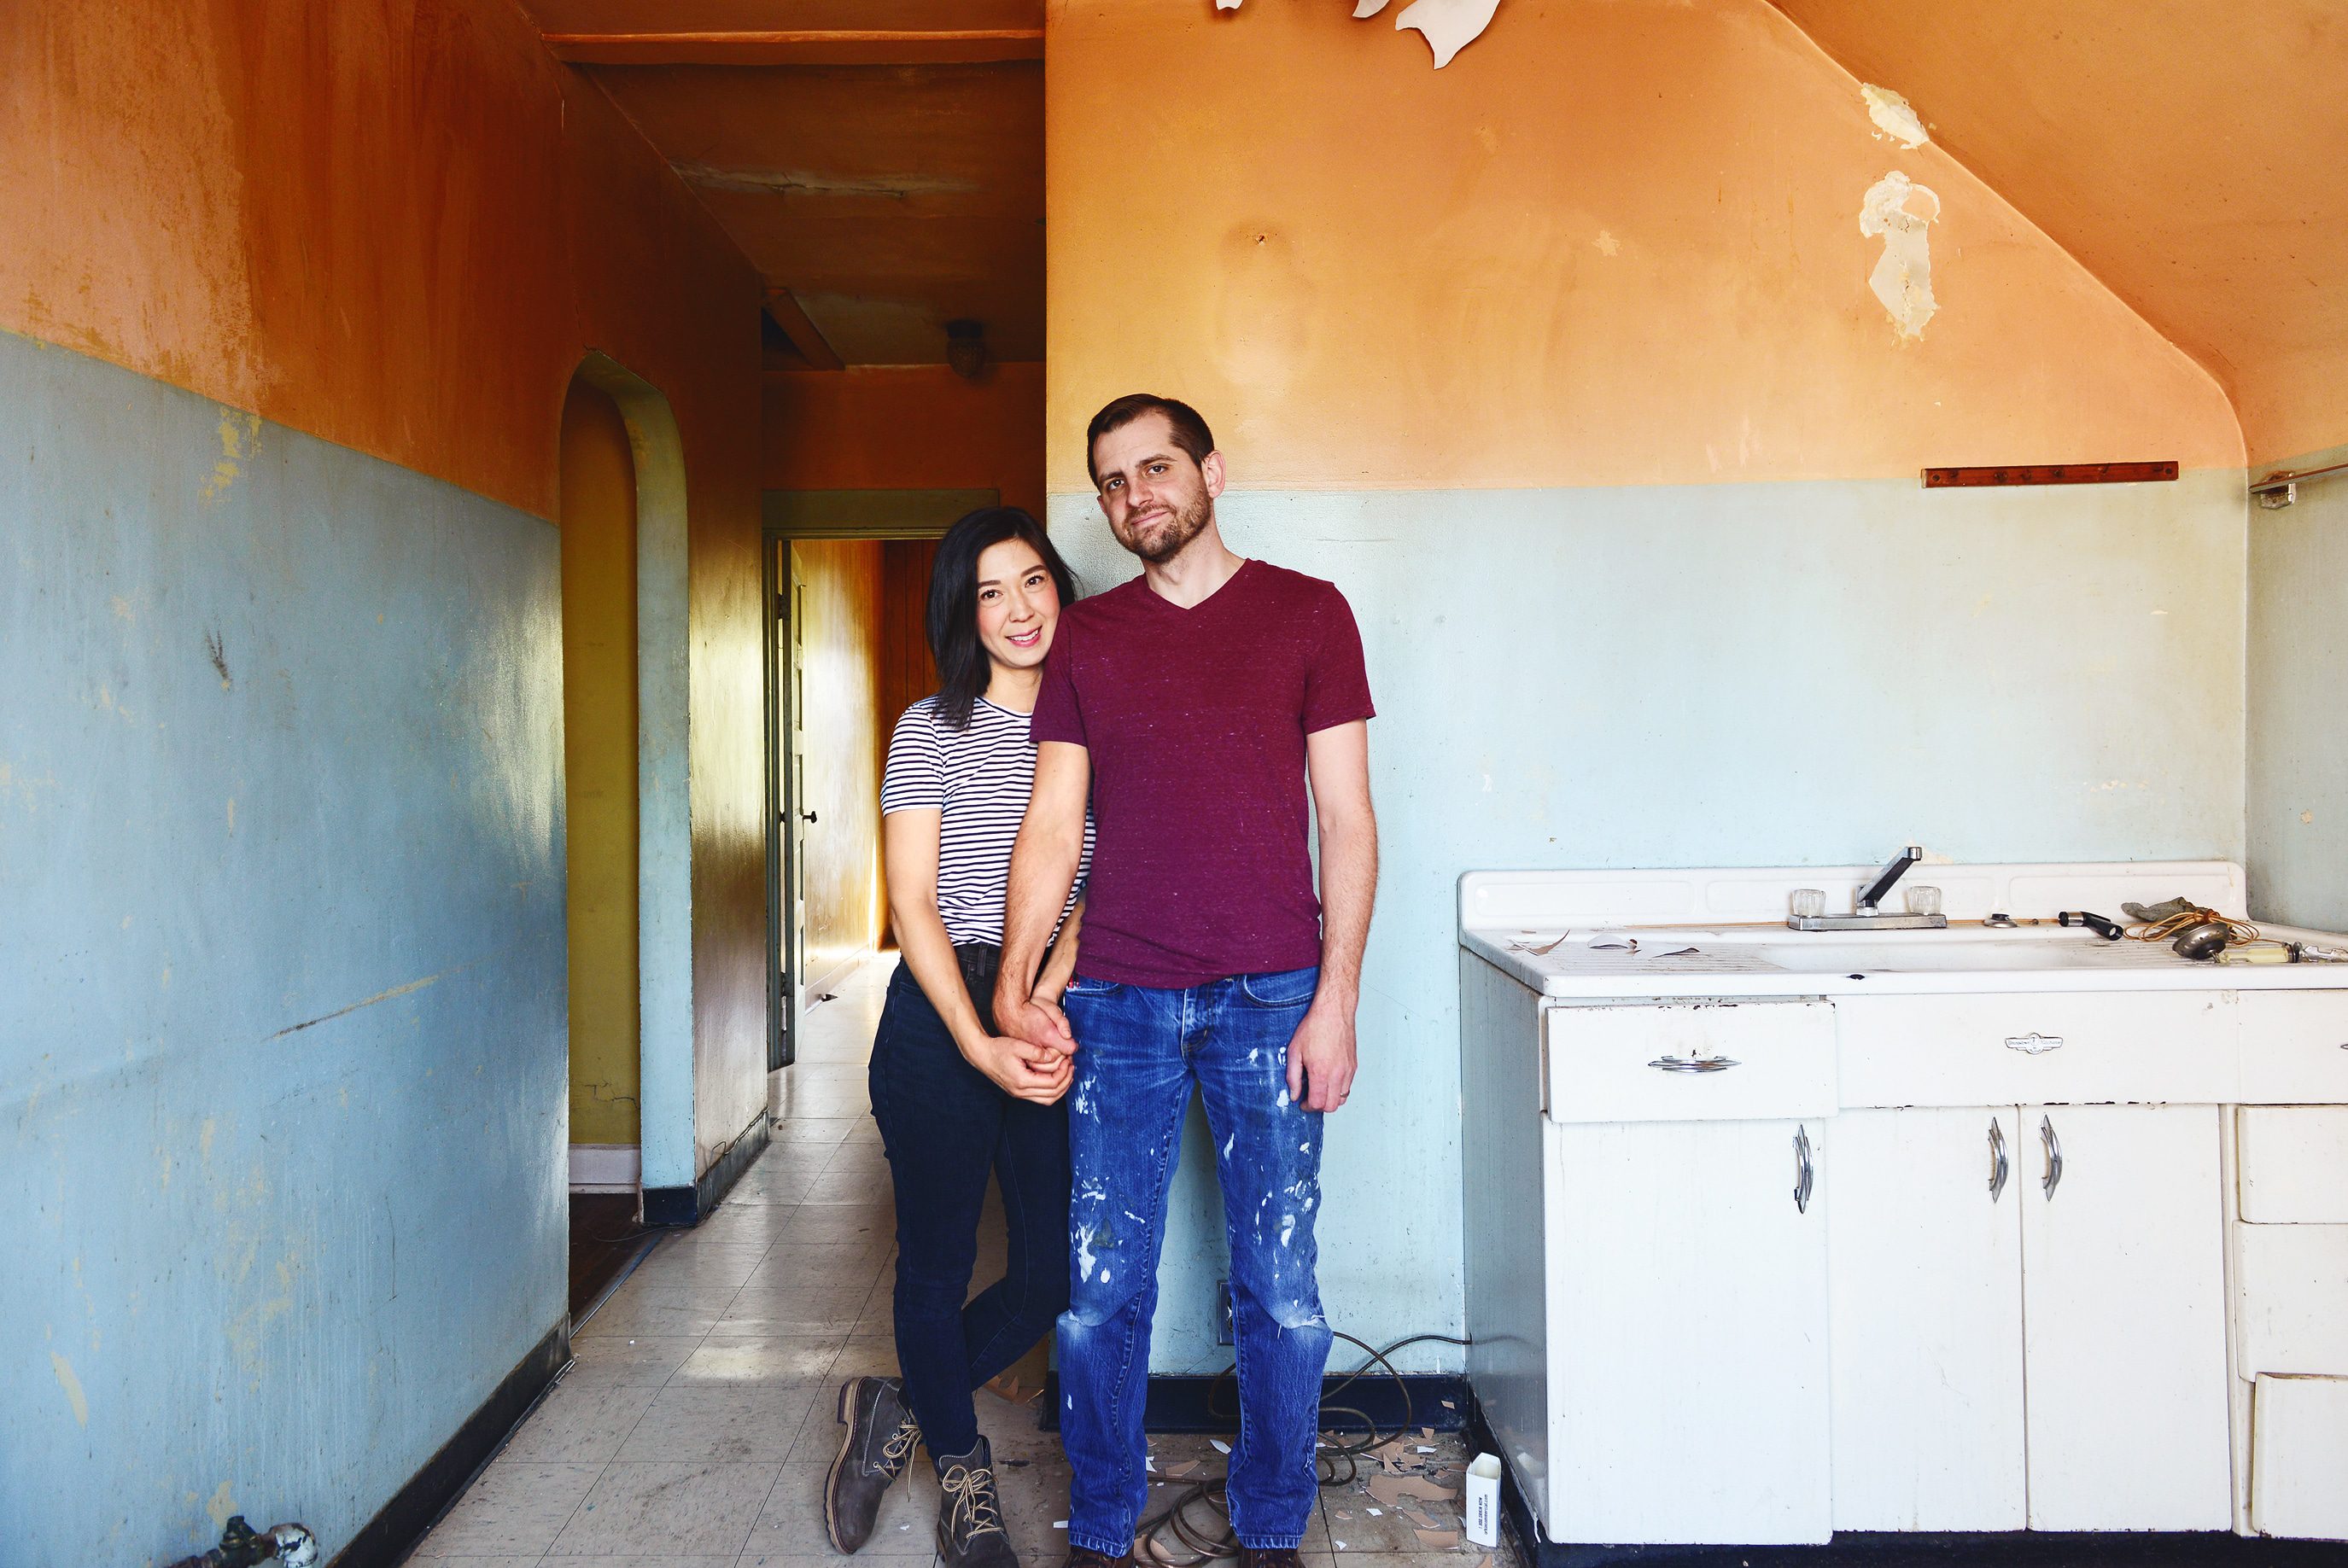 Scott and Kim standing in the Two Flat kitchen before it's renovated | Our goals for 2020, the best is yet to come! via Yellow Brick Home